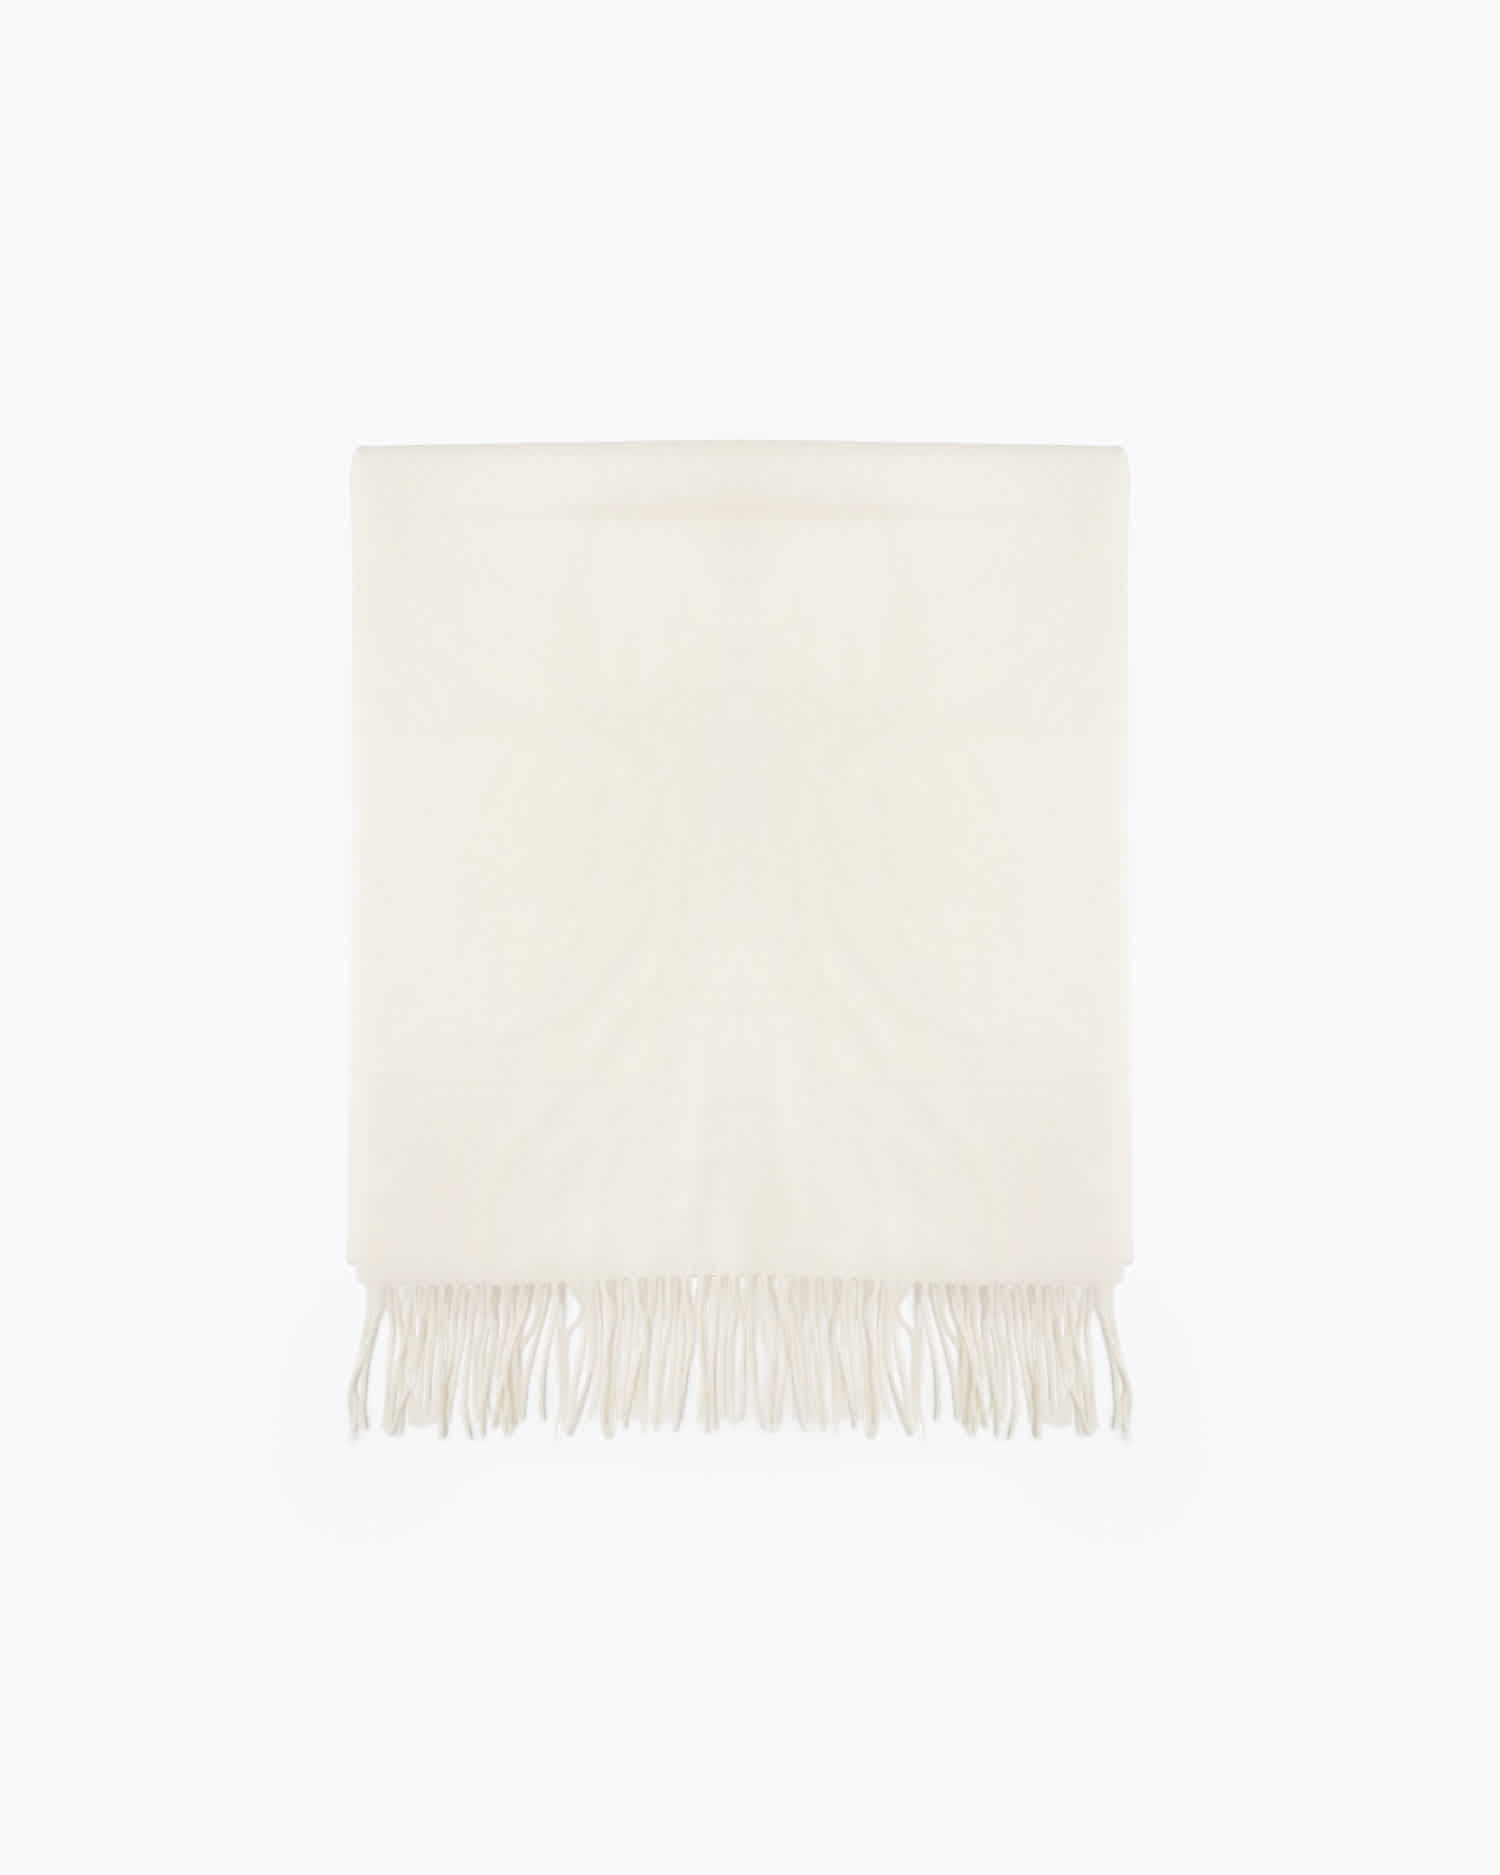 Cashmere throw blanket in ivory